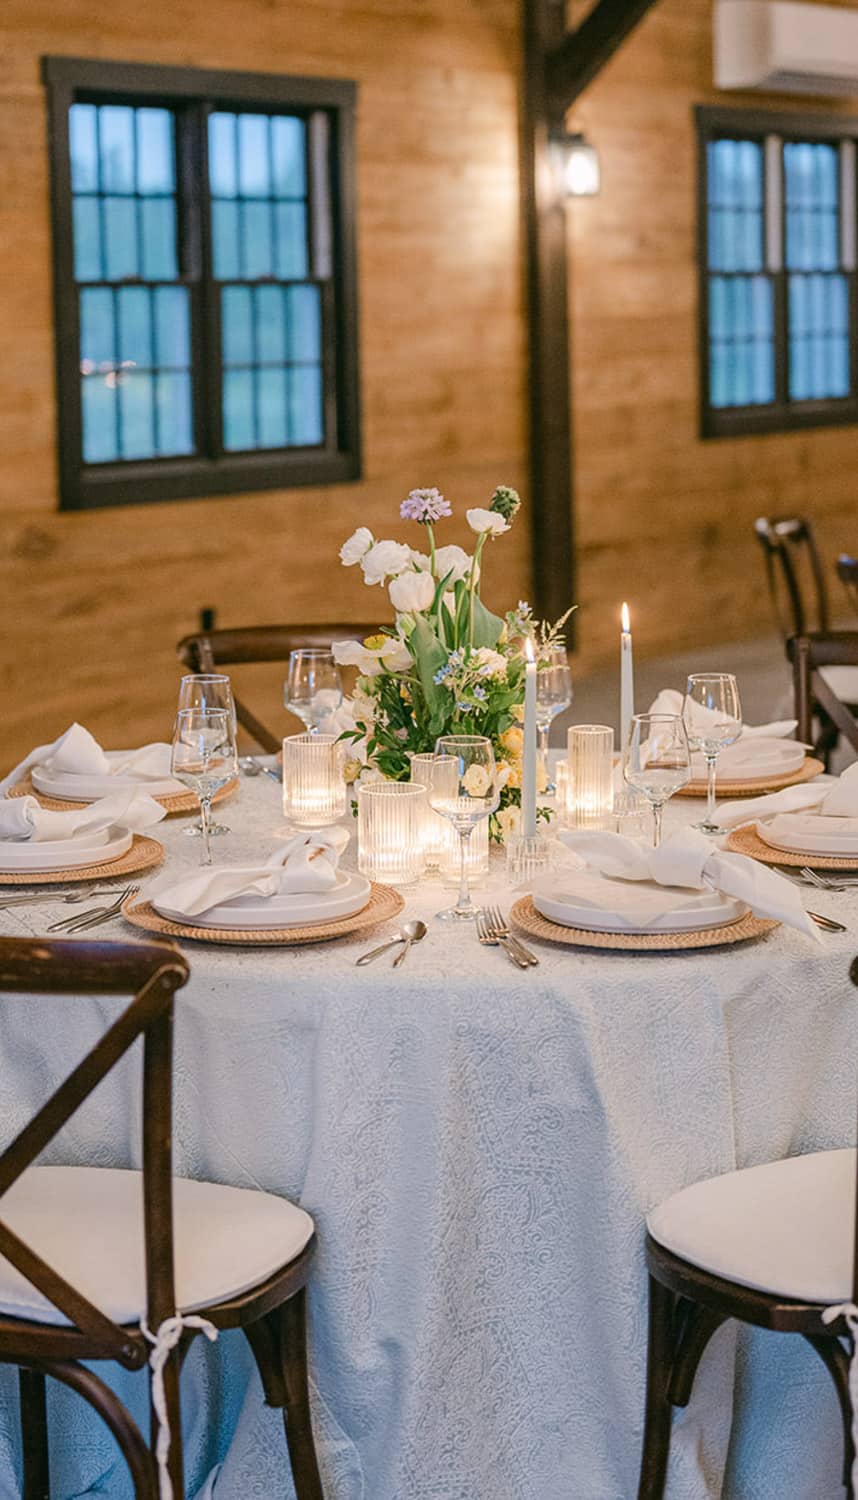 Elegant dining setup in a rustic venue with a floral centerpiece, candles, and a lace tablecloth, surrounded by wooden chairs.